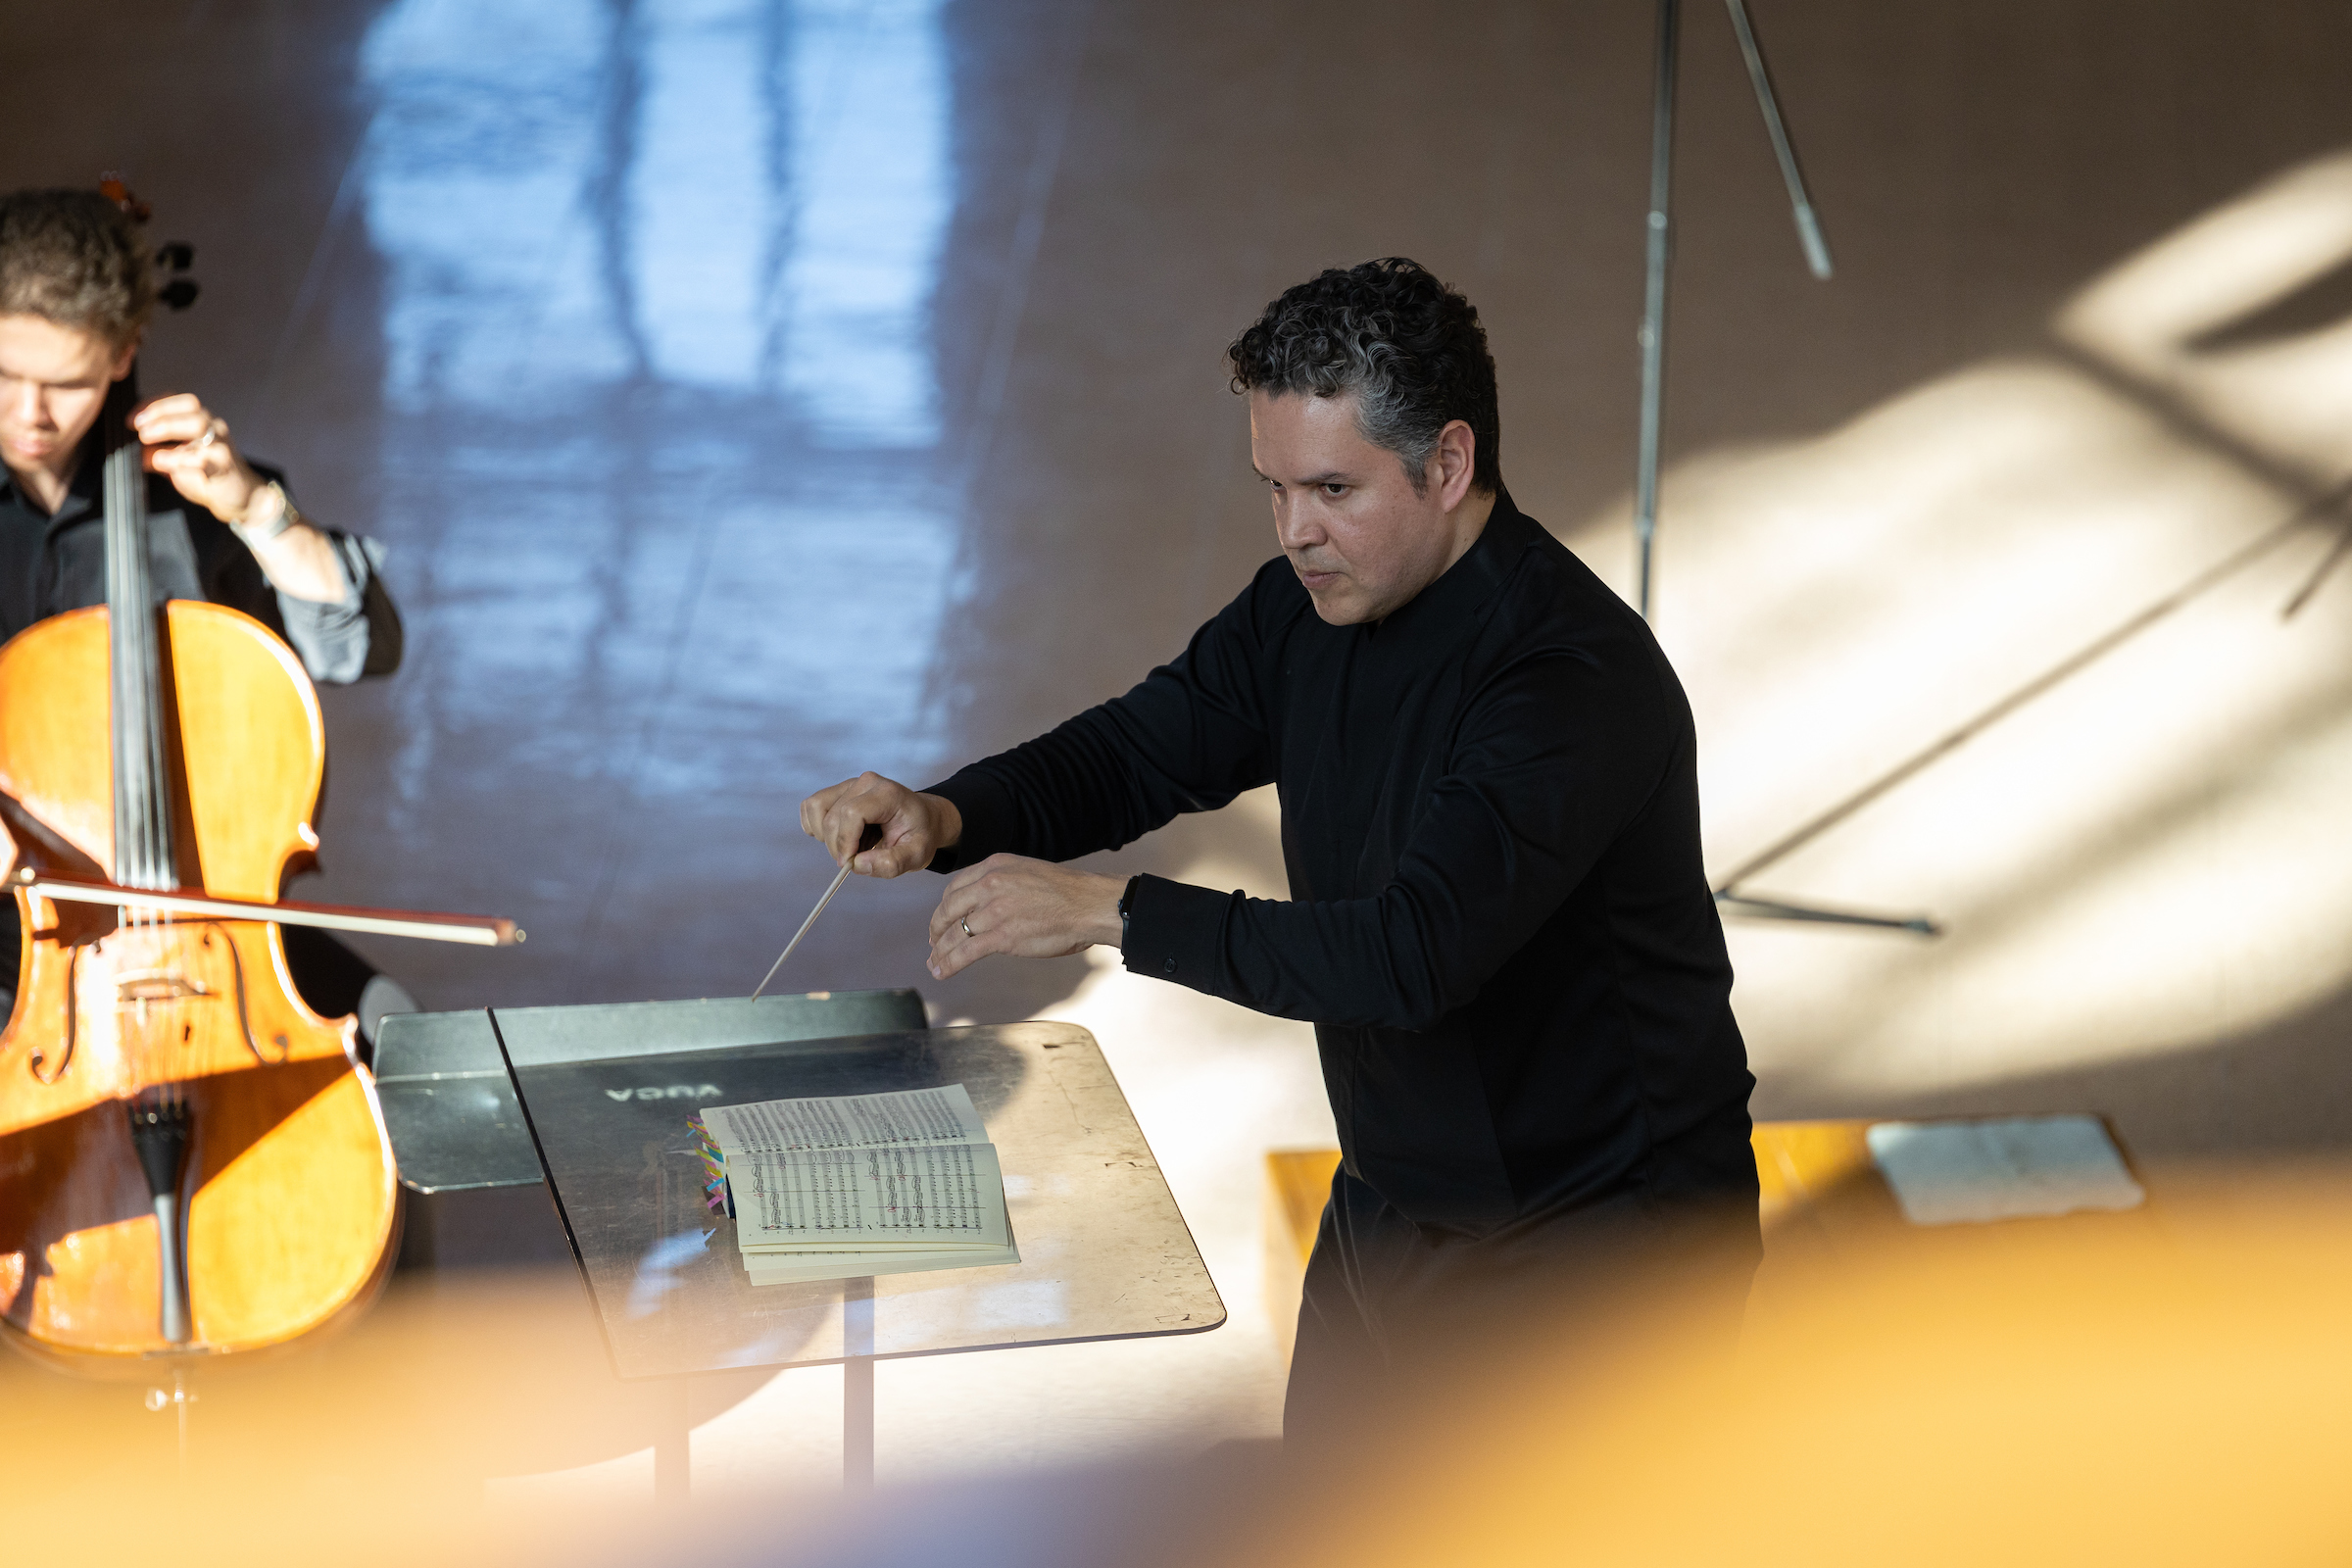 Professor Piedra returned to the U.S. to earn his DMA in orchestral conducting from the University of Michigan in 2018